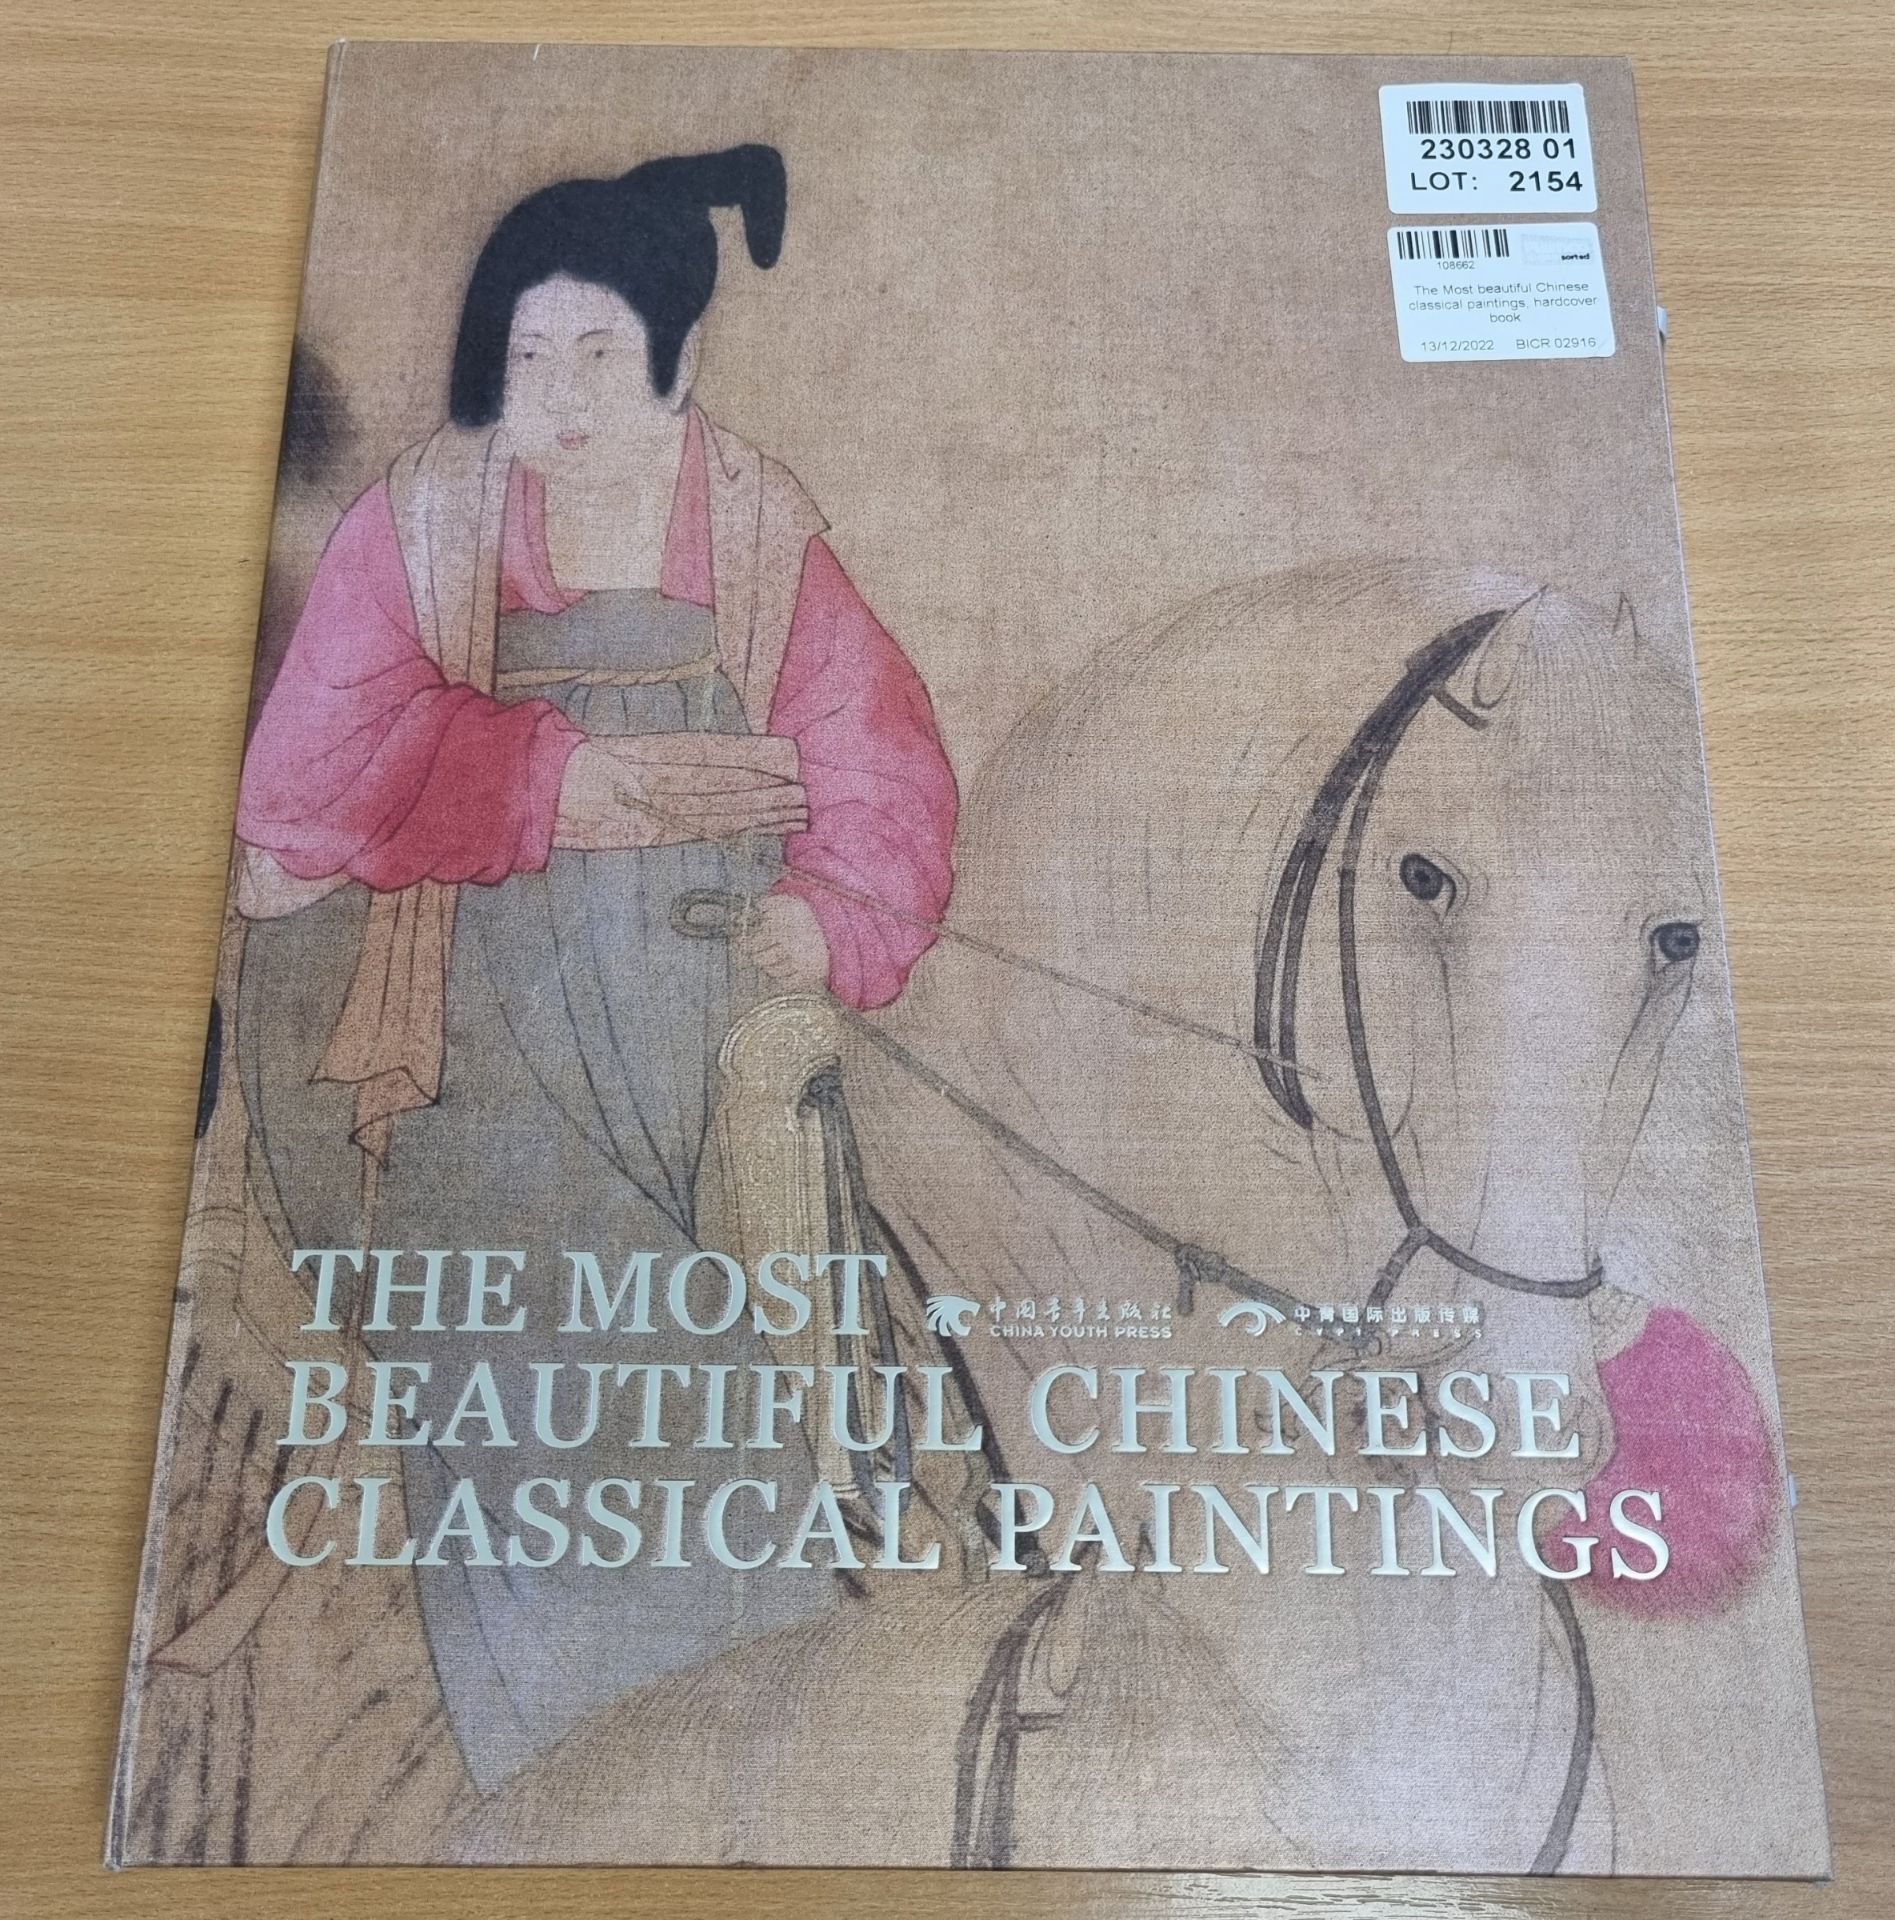 The Most beautiful Chinese classical paintings hardcover book